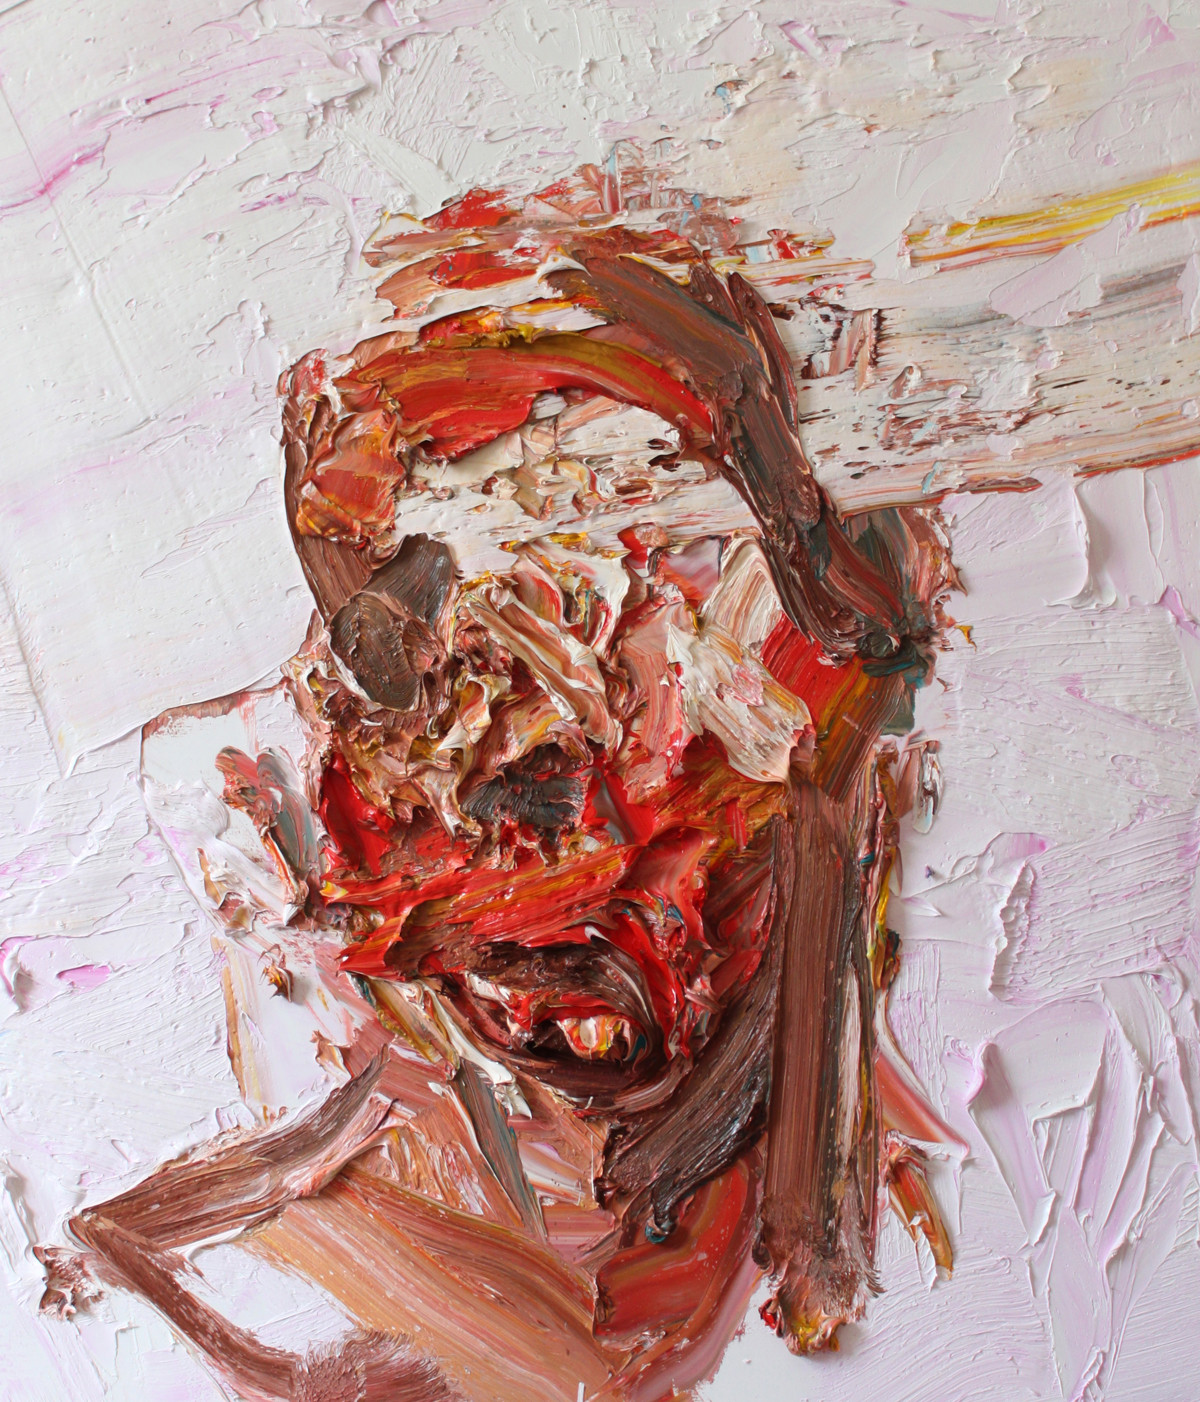 Antony Micallef's I Love That You Love What I Love Coming Soon